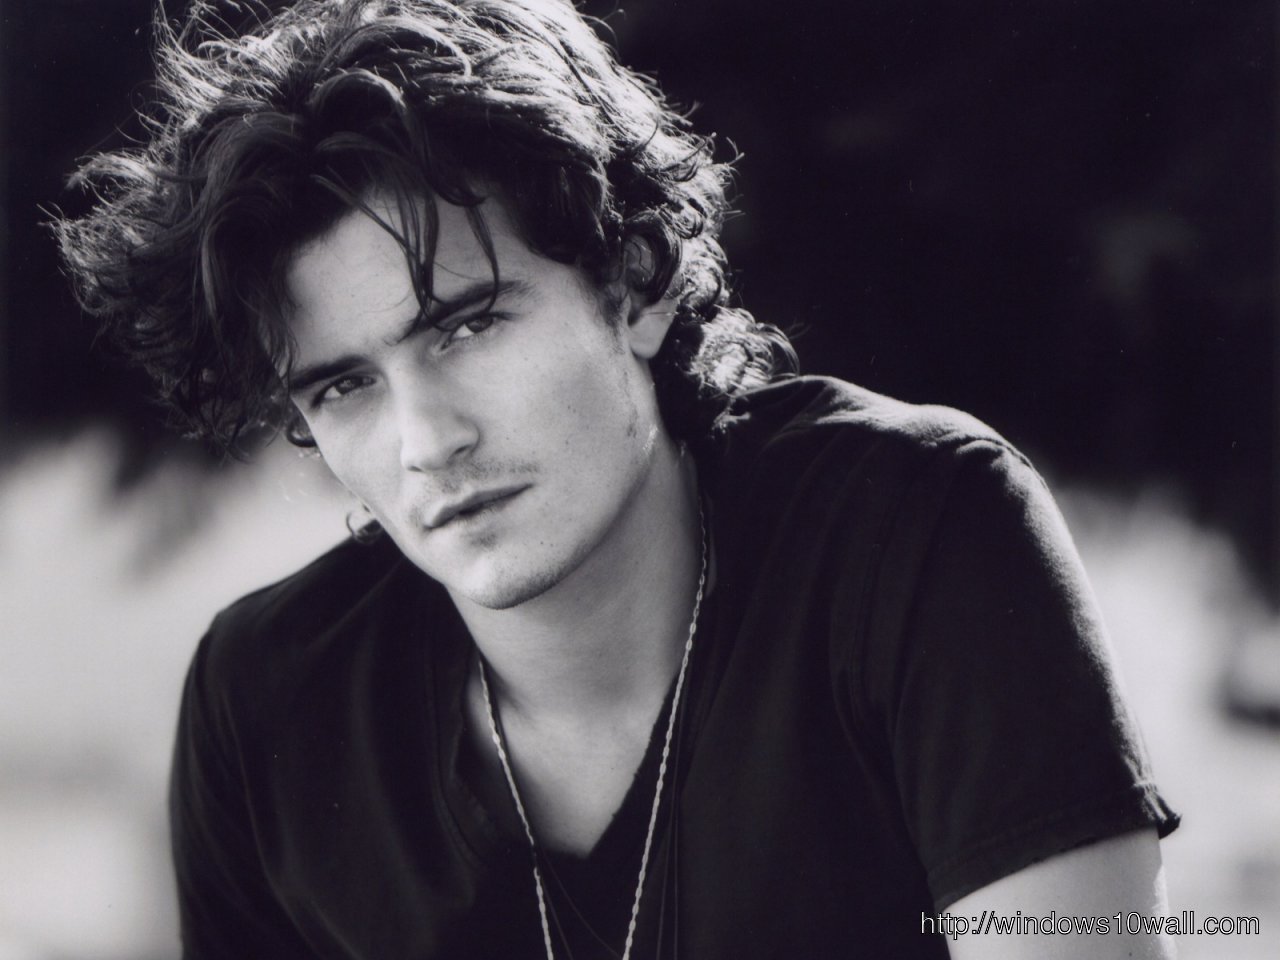 orlando bloom in young age photo